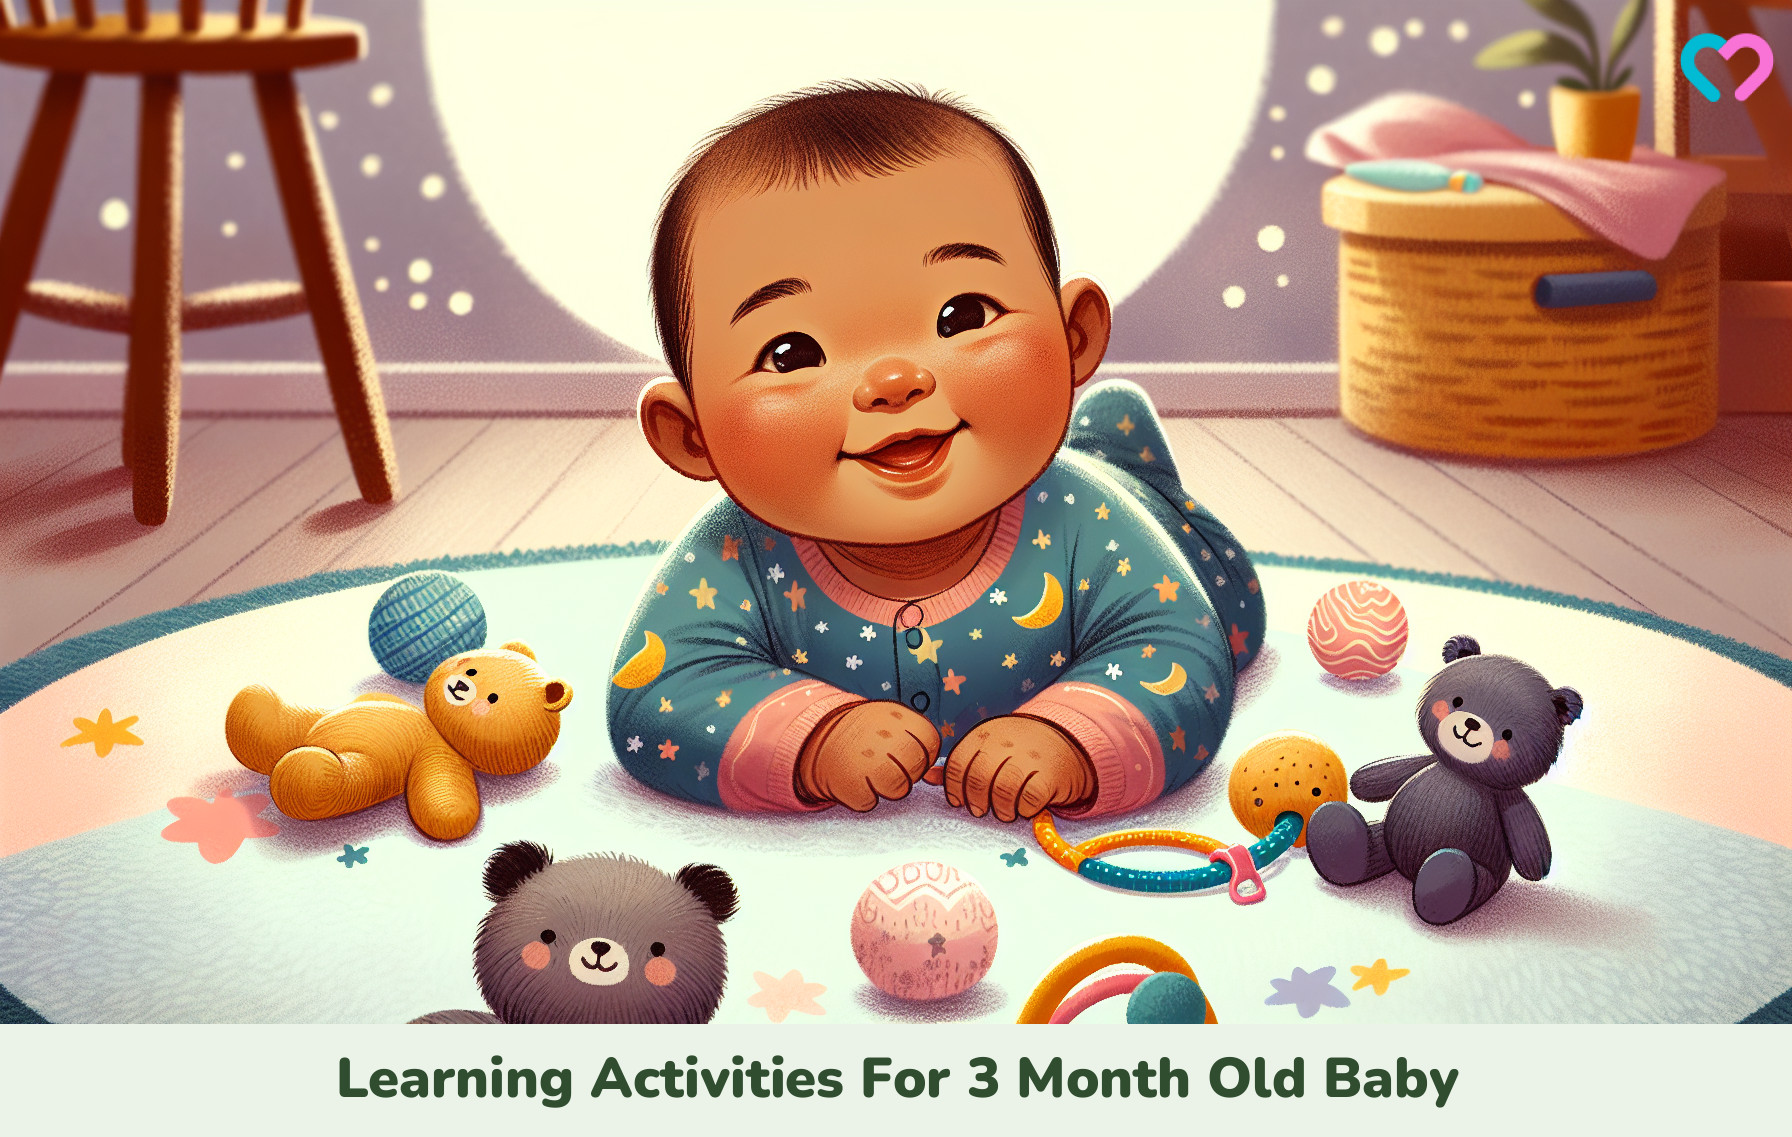 Learning Activities For 3 Month Old Baby_illustration